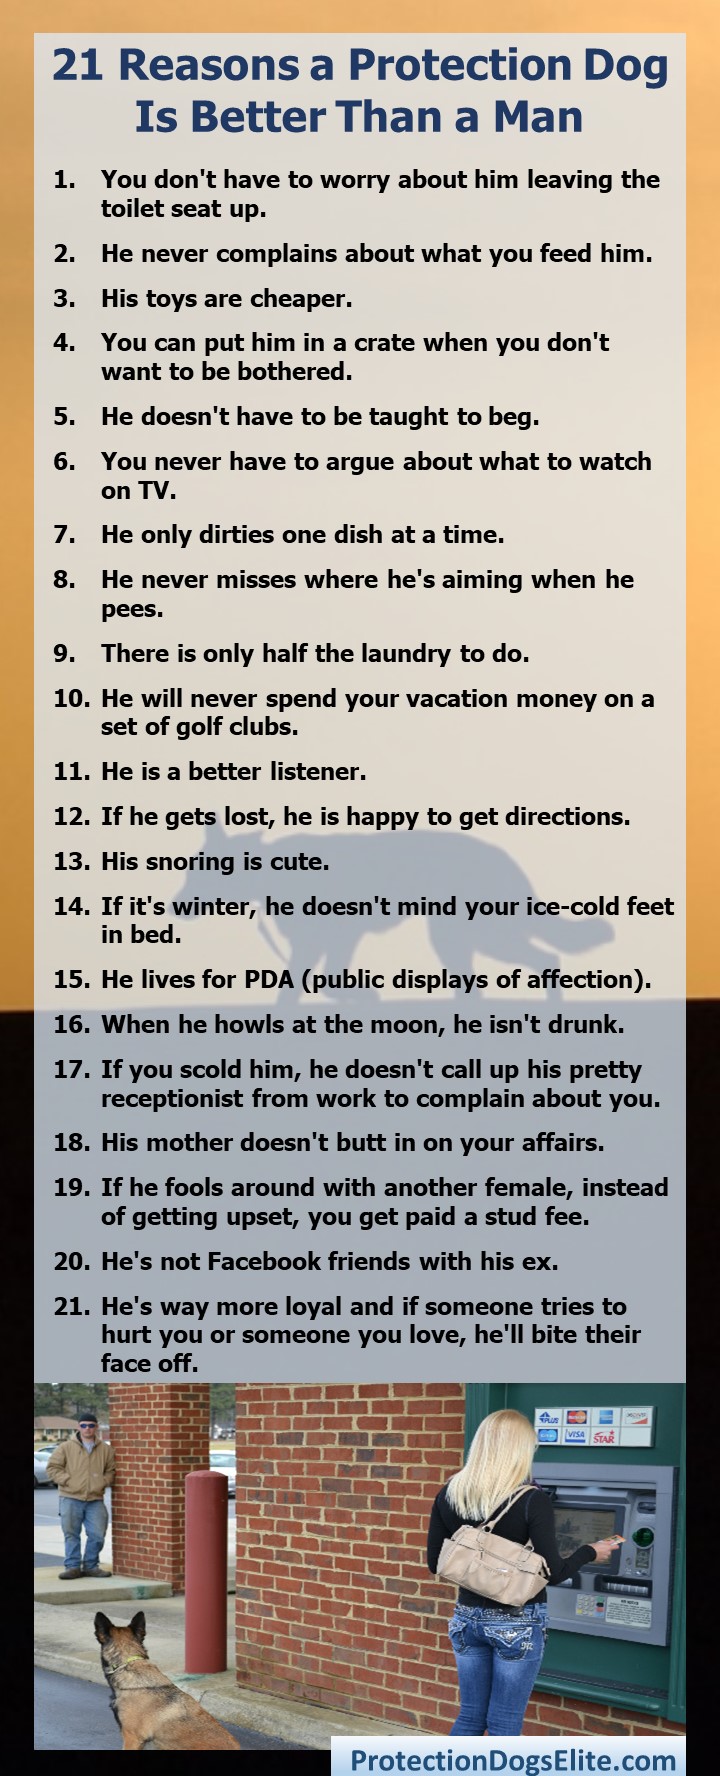 21 reasons why a protection dog is always better than a man. This is a very funny and yet often true list of reasons why dogs are better than men. #dogjokes #ilovedogs #dogsarebetterthanmen